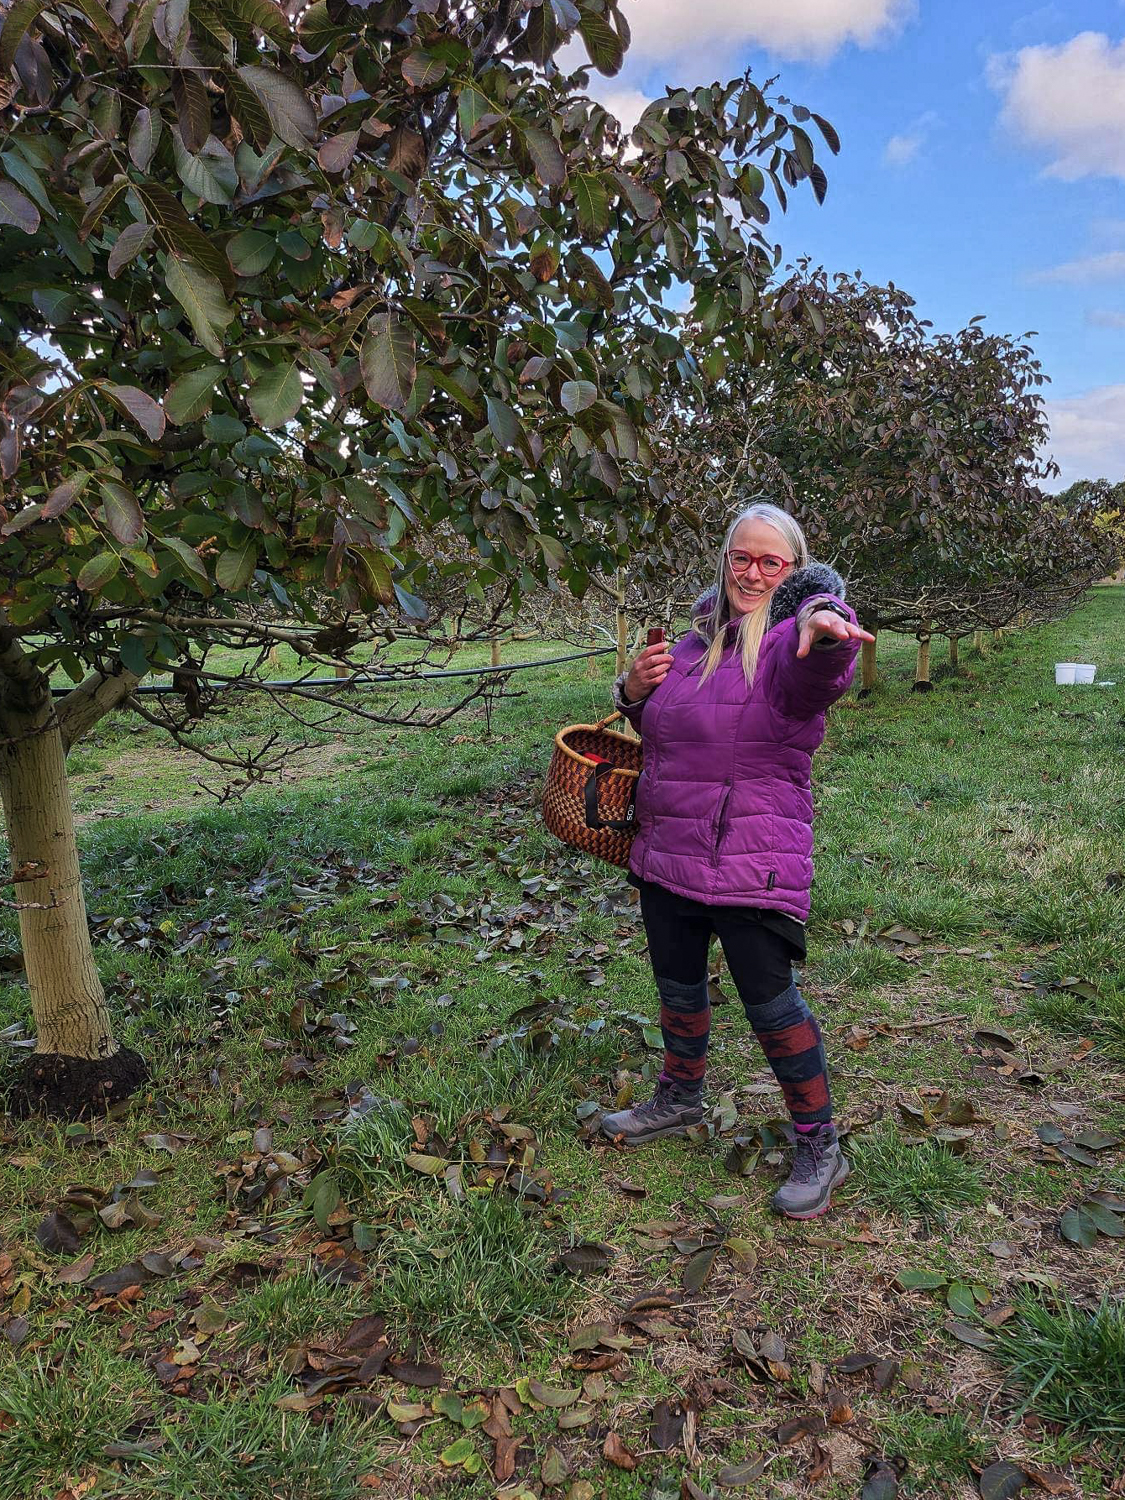 Barb is standing in the walnut orchard pointing at the camera. She is wearing a purple jacket and holding a large round basket